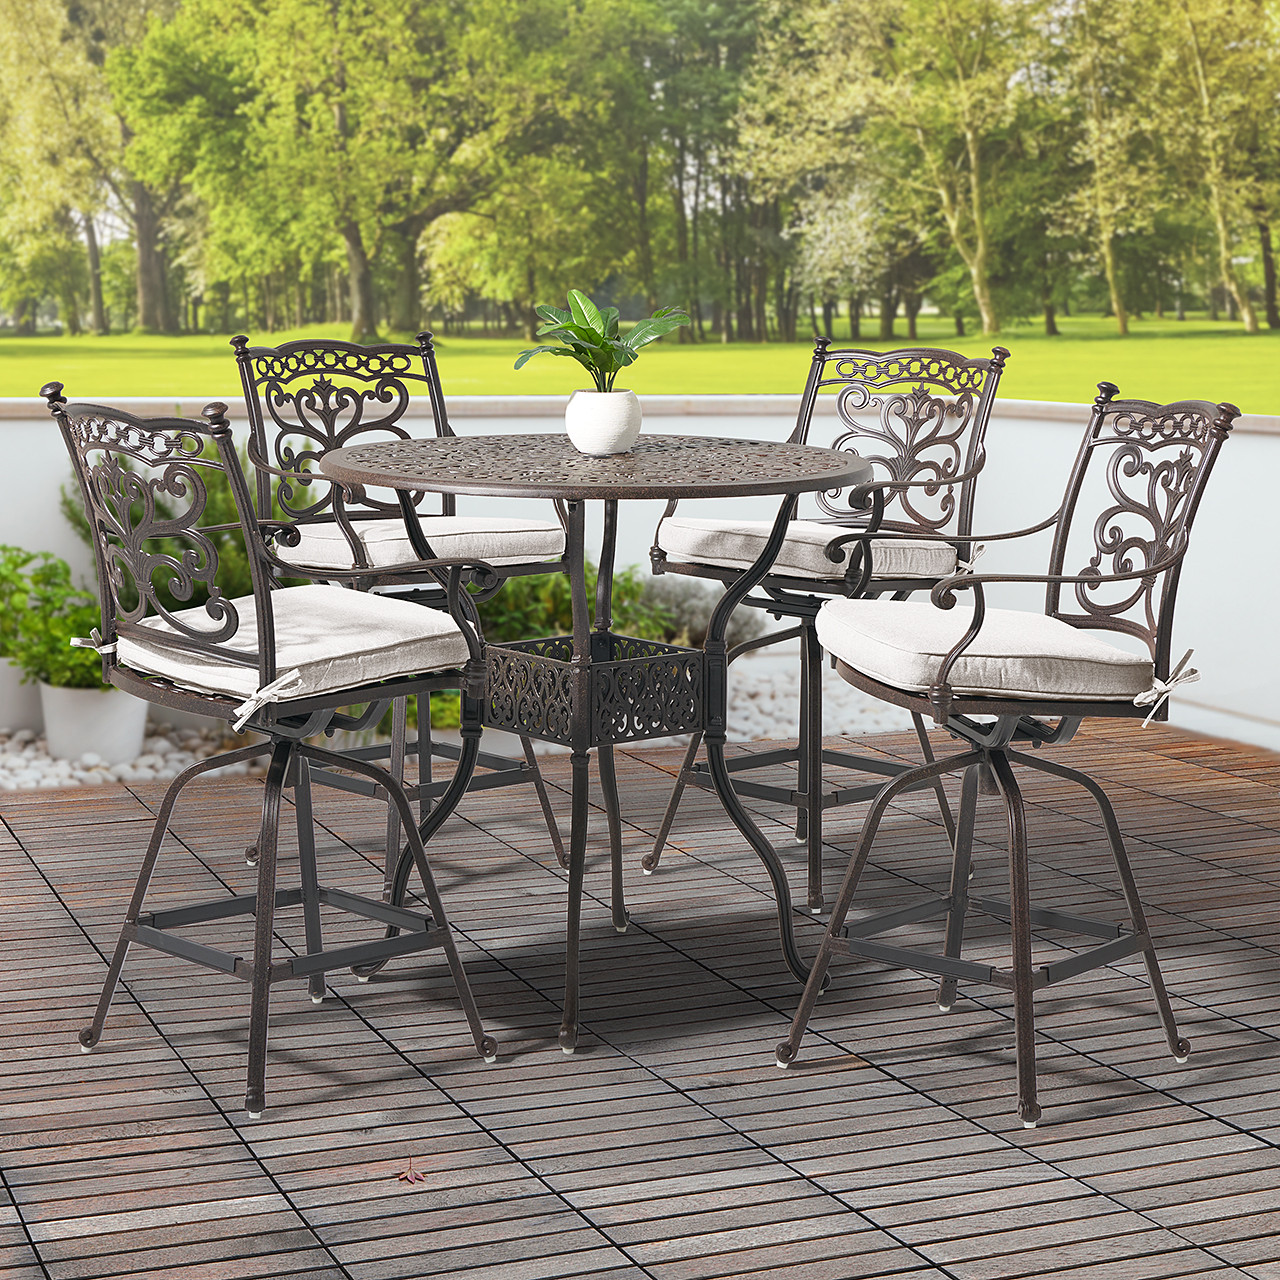 Milan Aged Bronze Cast Aluminum with Cushions 5 Piece Swivel Bar Set + 42 in. D Table